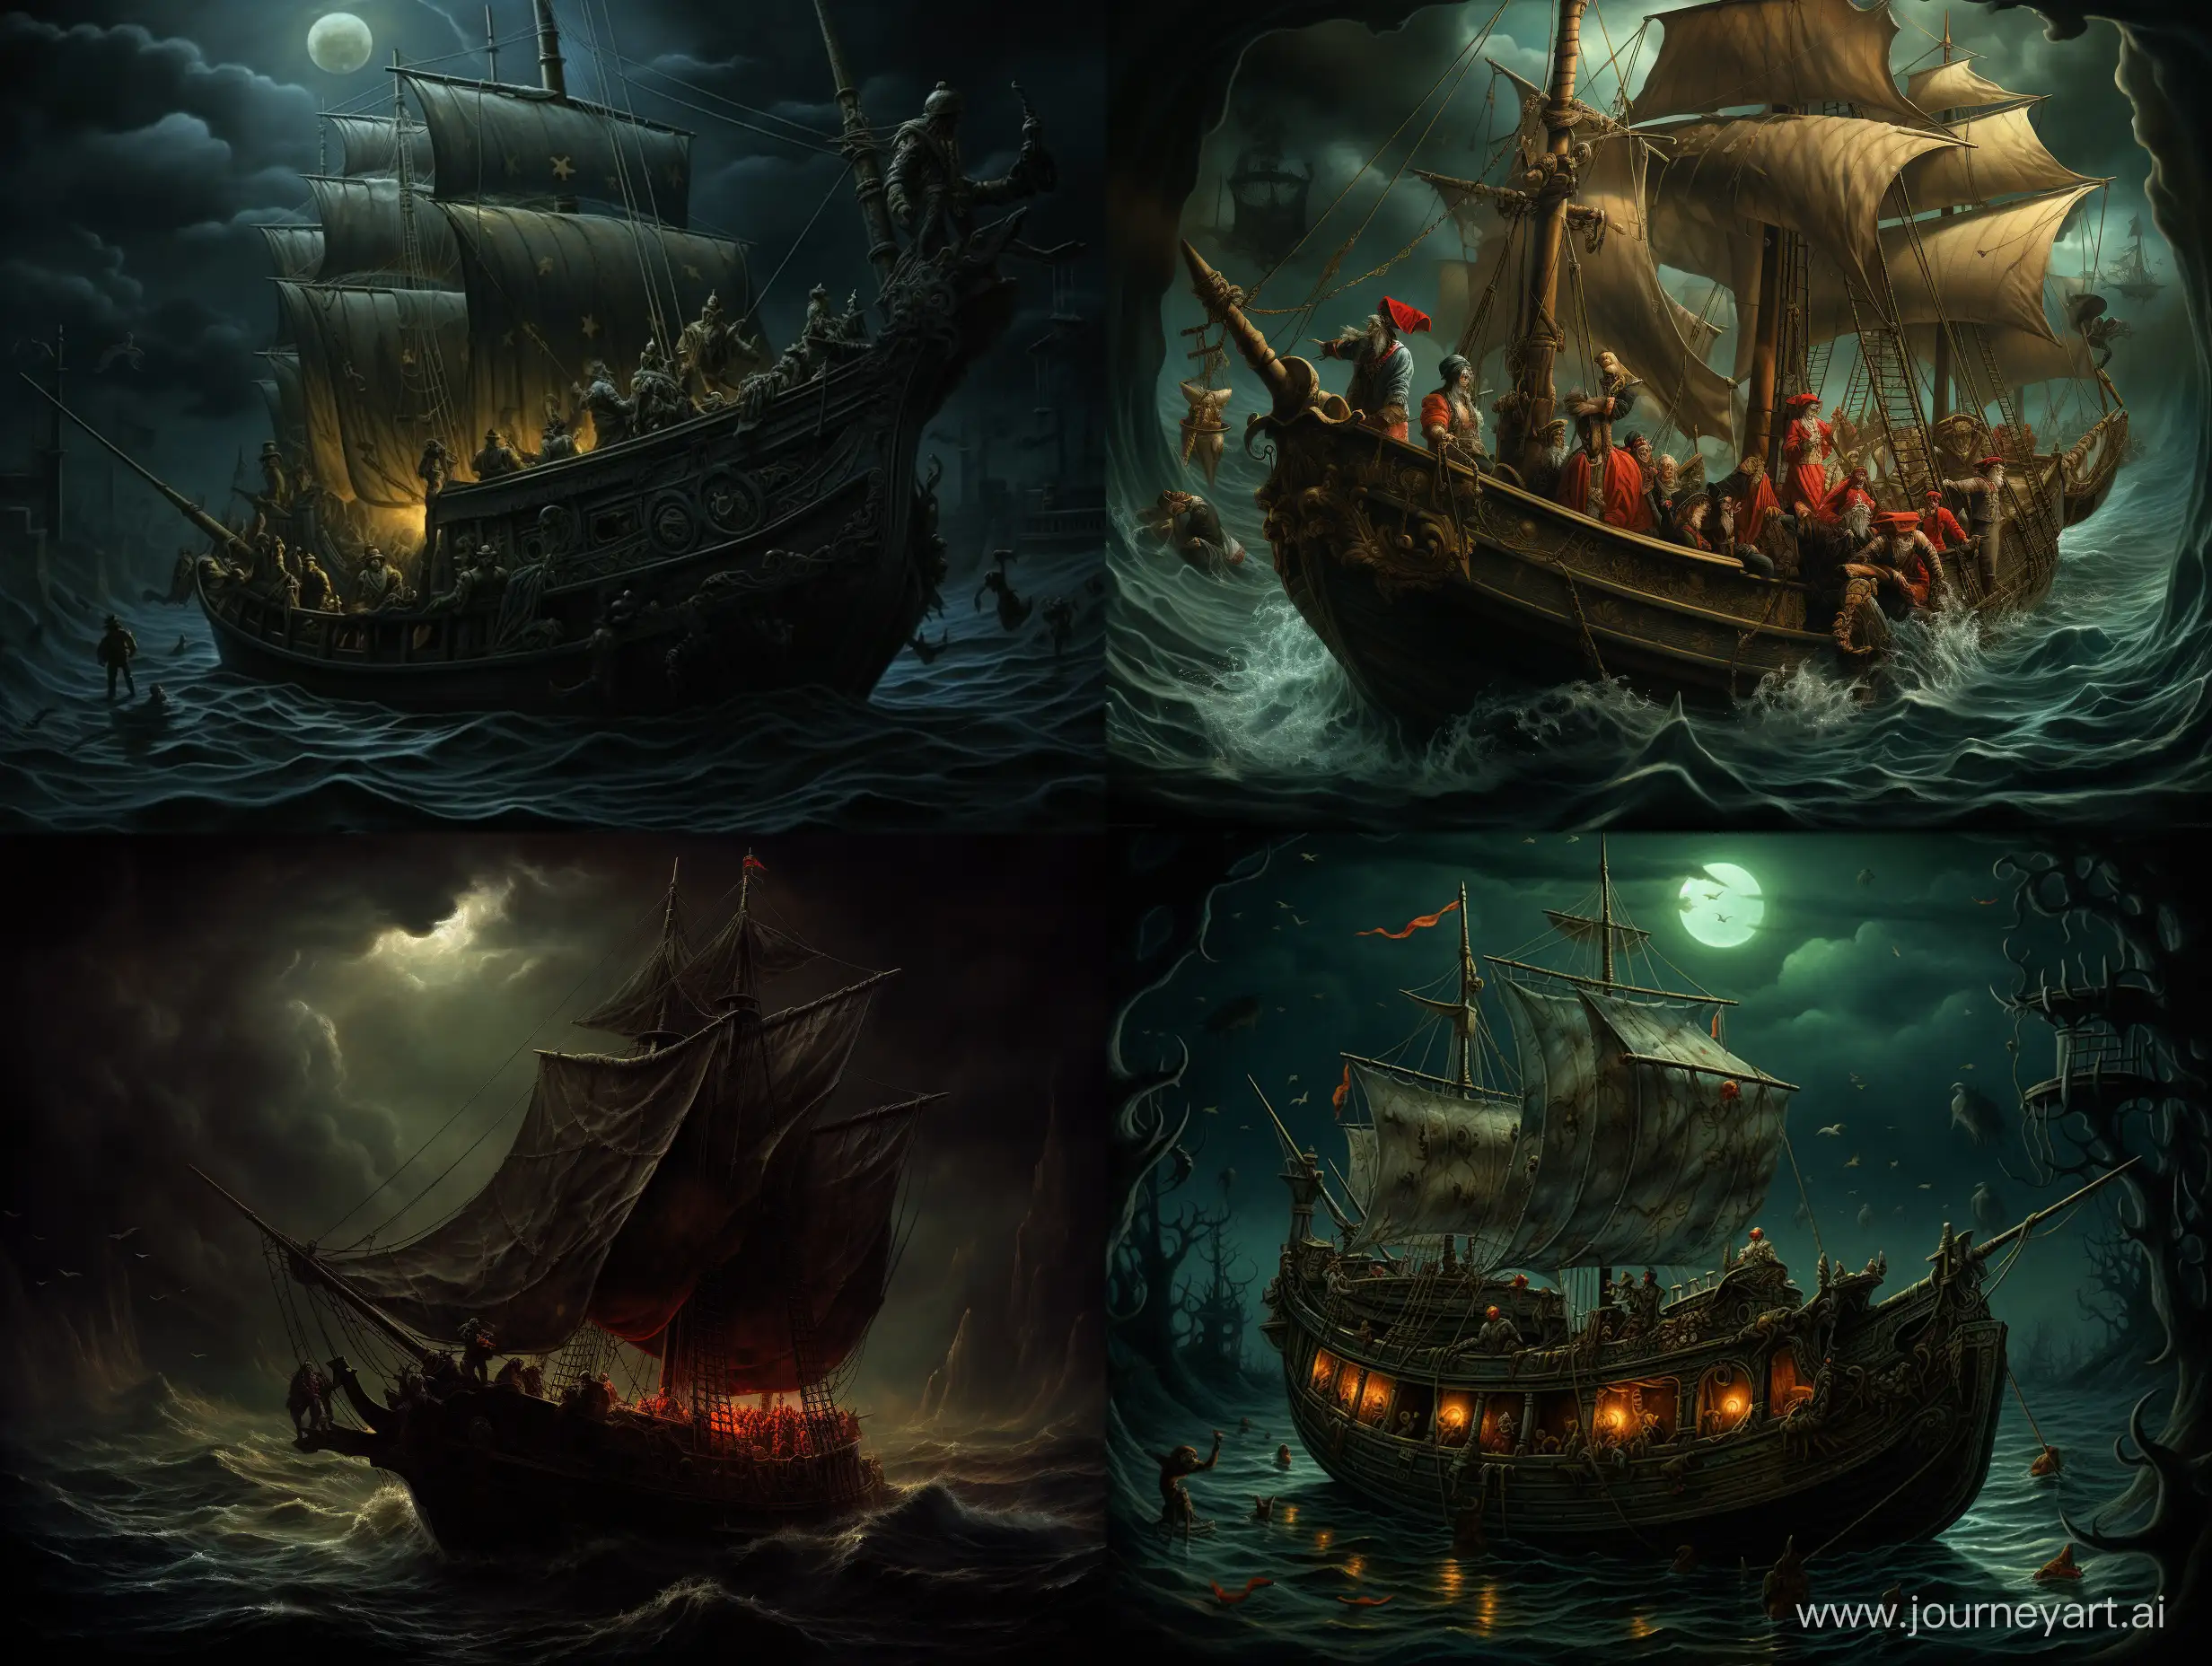 Mystical-Journey-on-the-Ship-of-Fools-through-Ancient-Waters